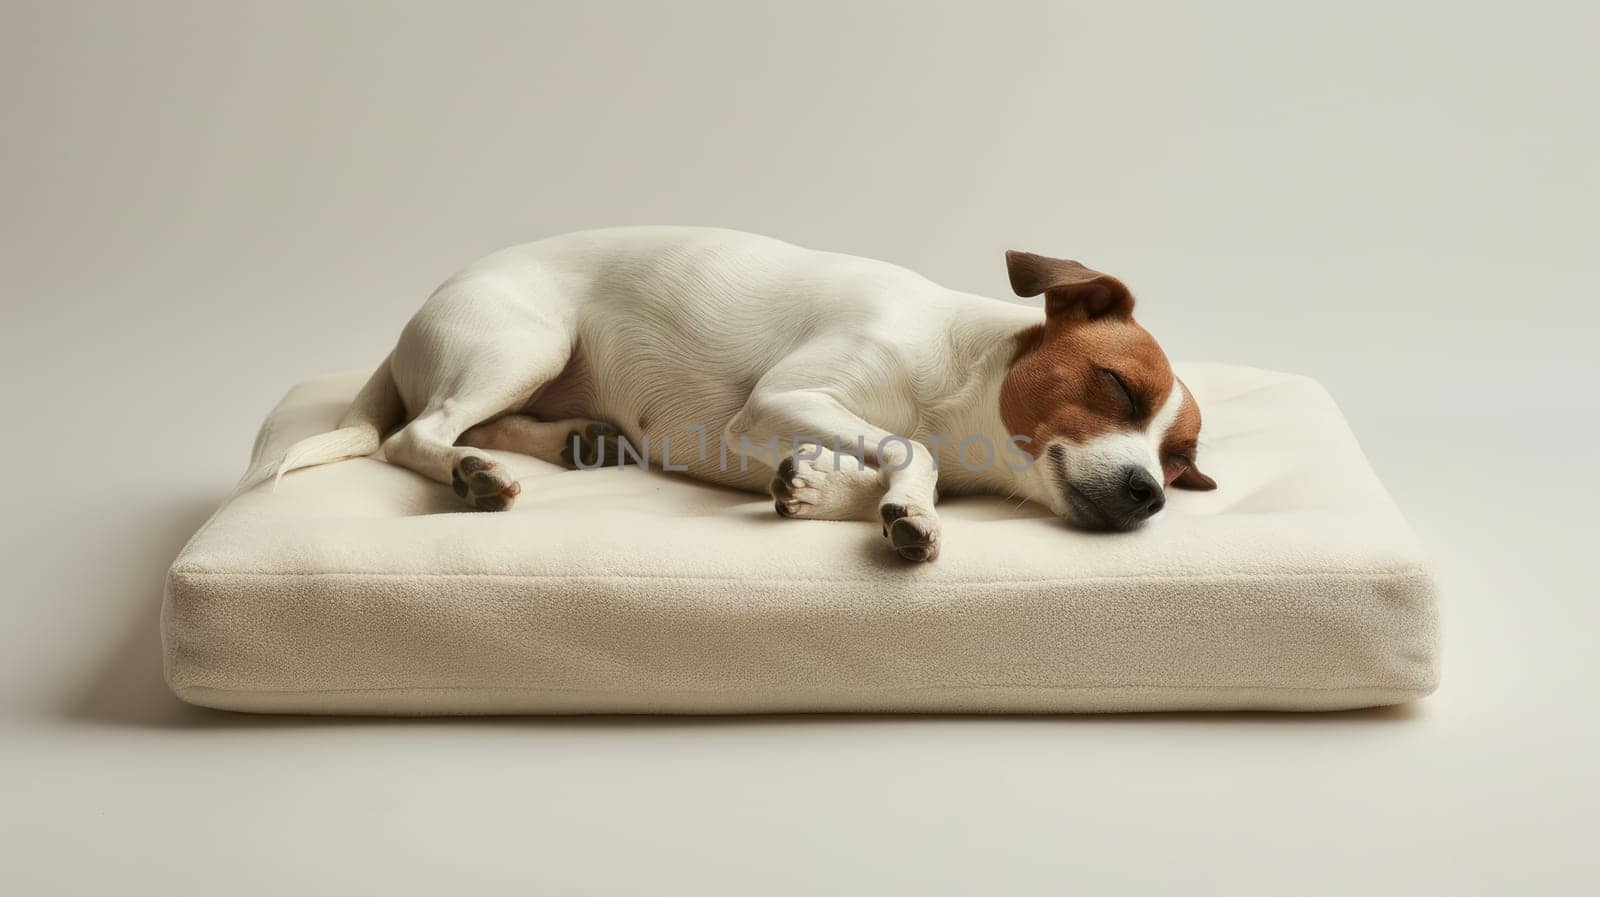 A dog is sleeping on a white dog bed